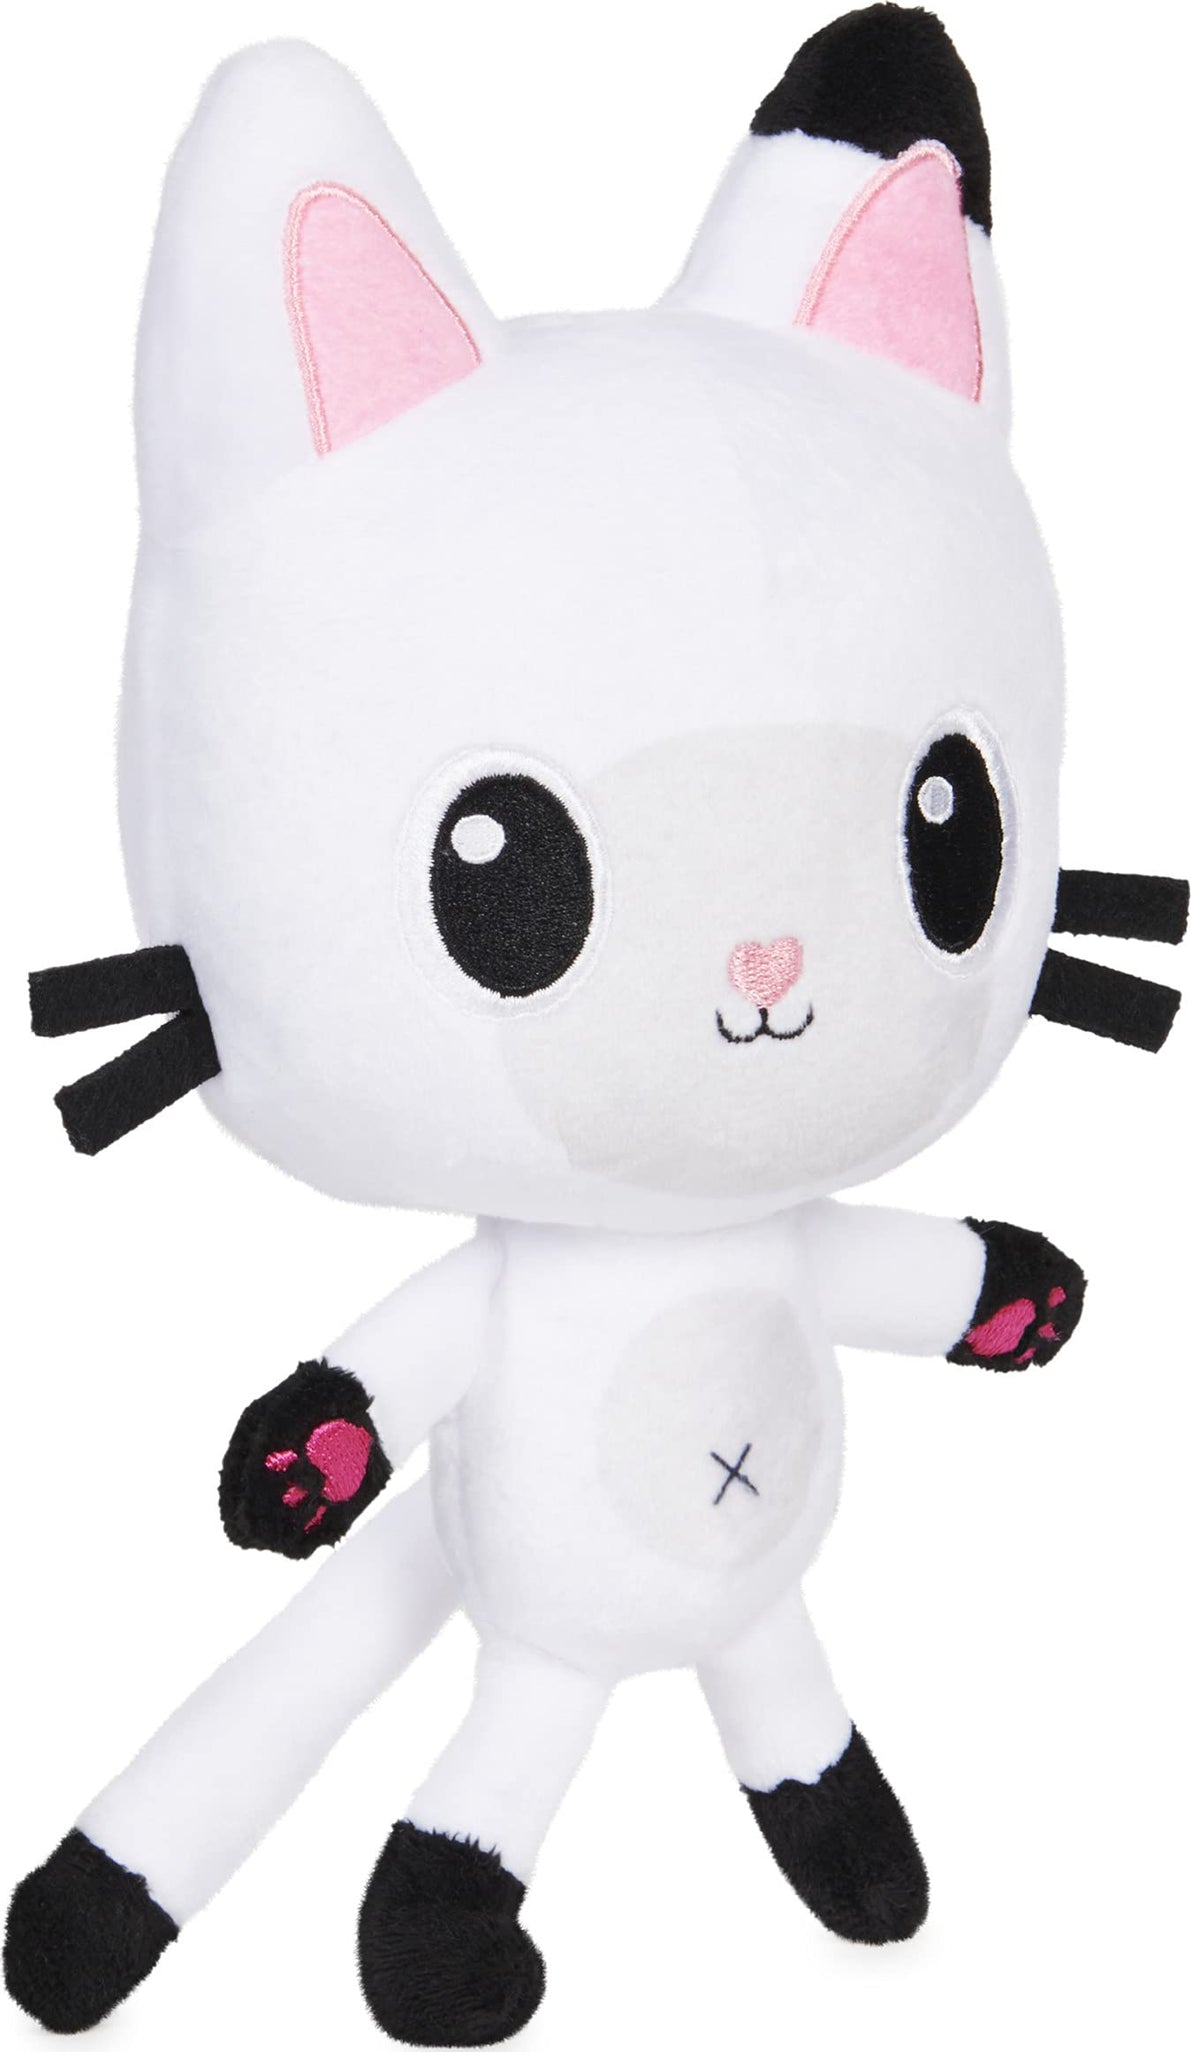 Gabby's Dollhouse, 8-inch Pandy Paws Purr-ific Plush Toy, Kids Toys for Ages 3 and up